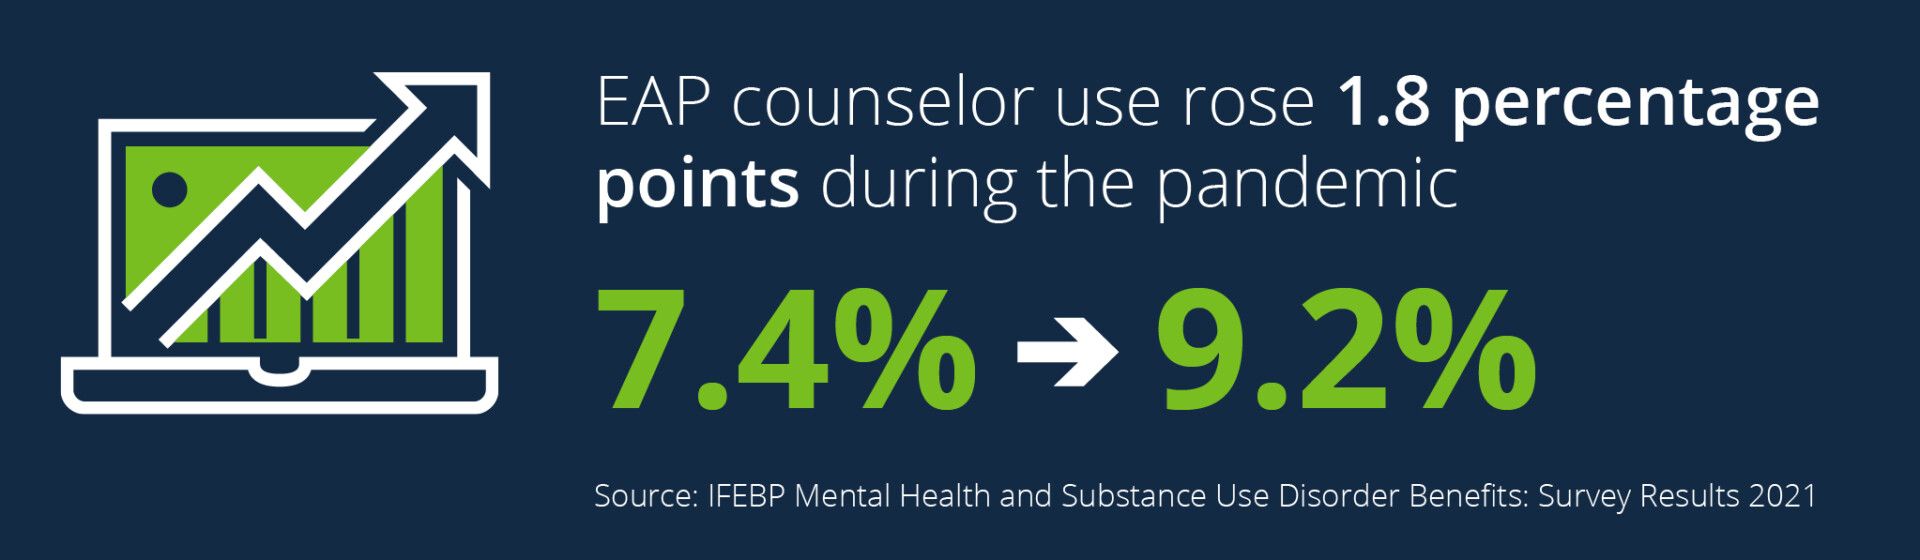 EAP counselor percentage